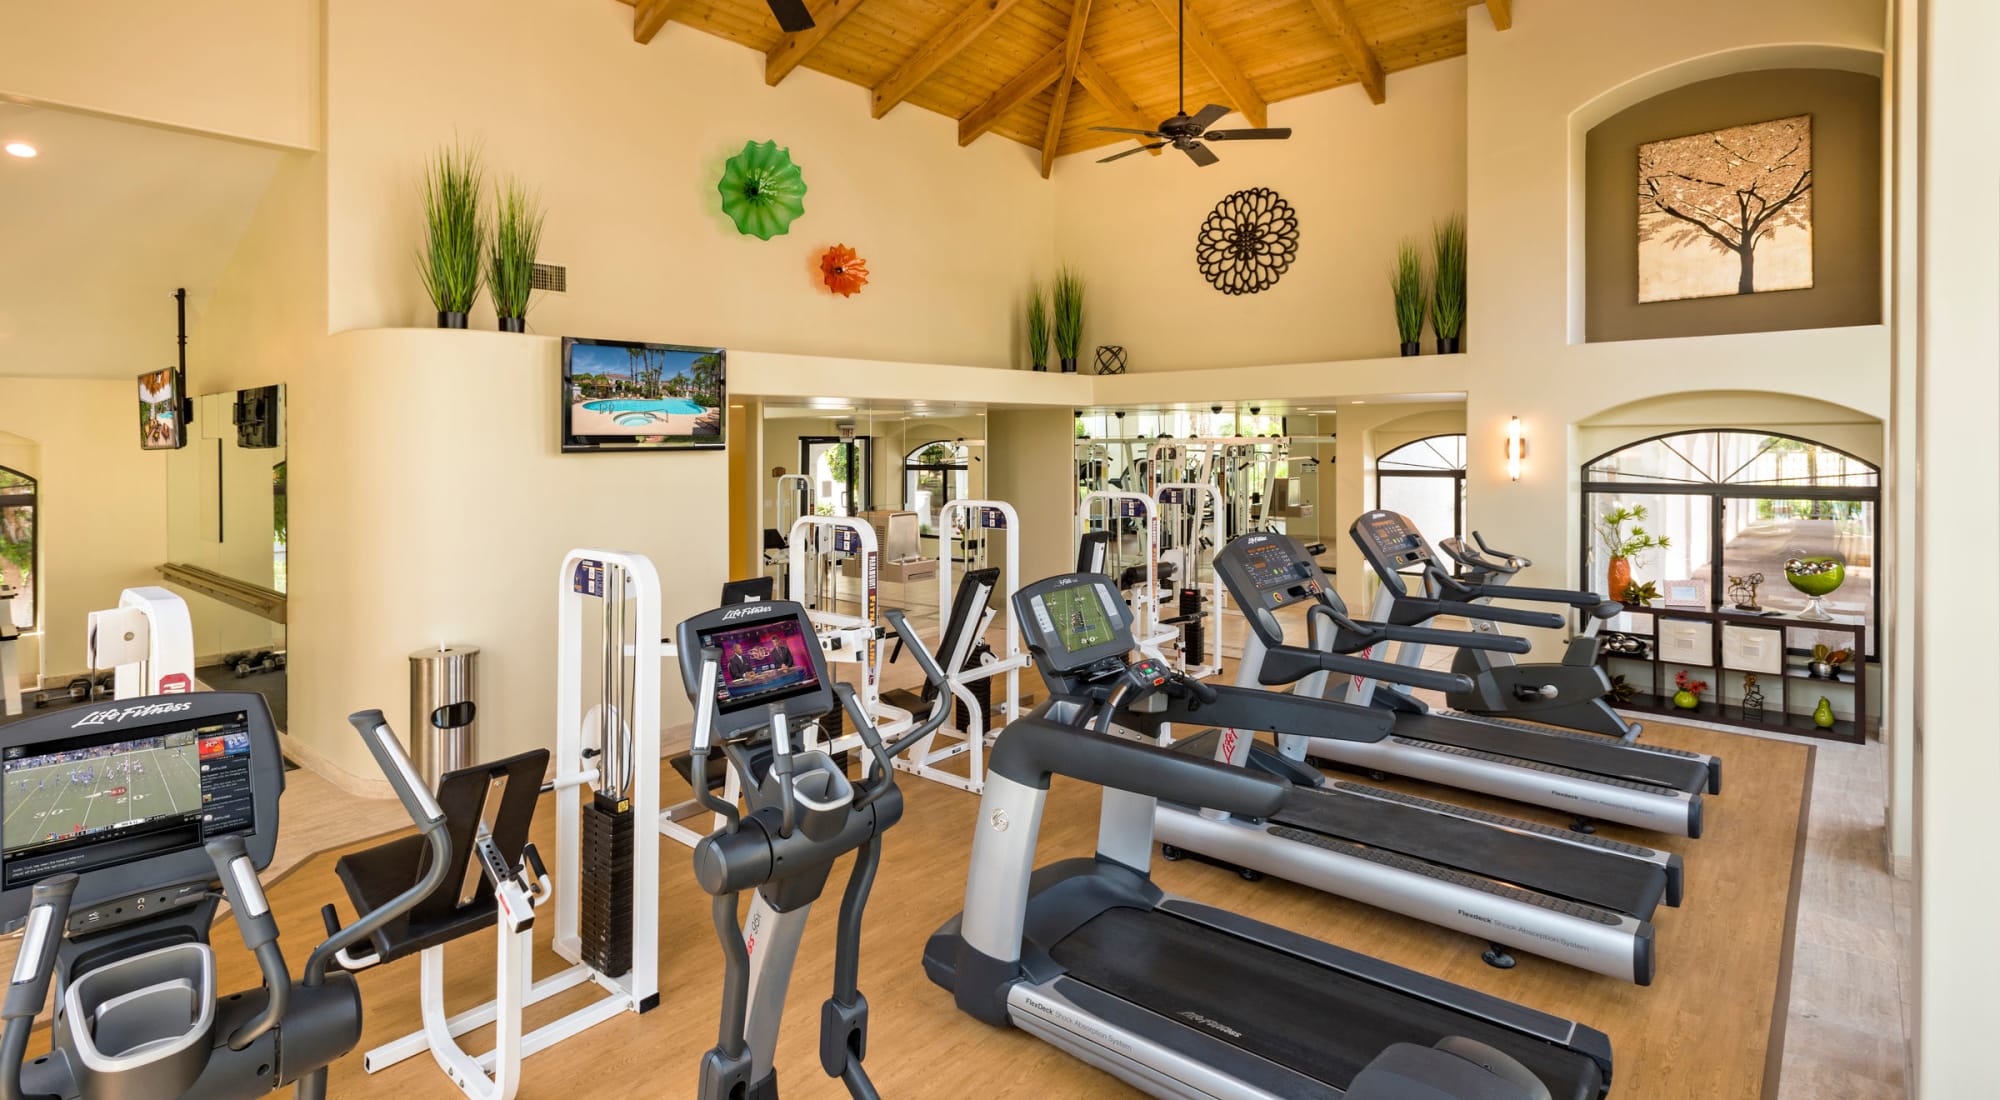 Fitness center at San Antigua in McCormick Ranch